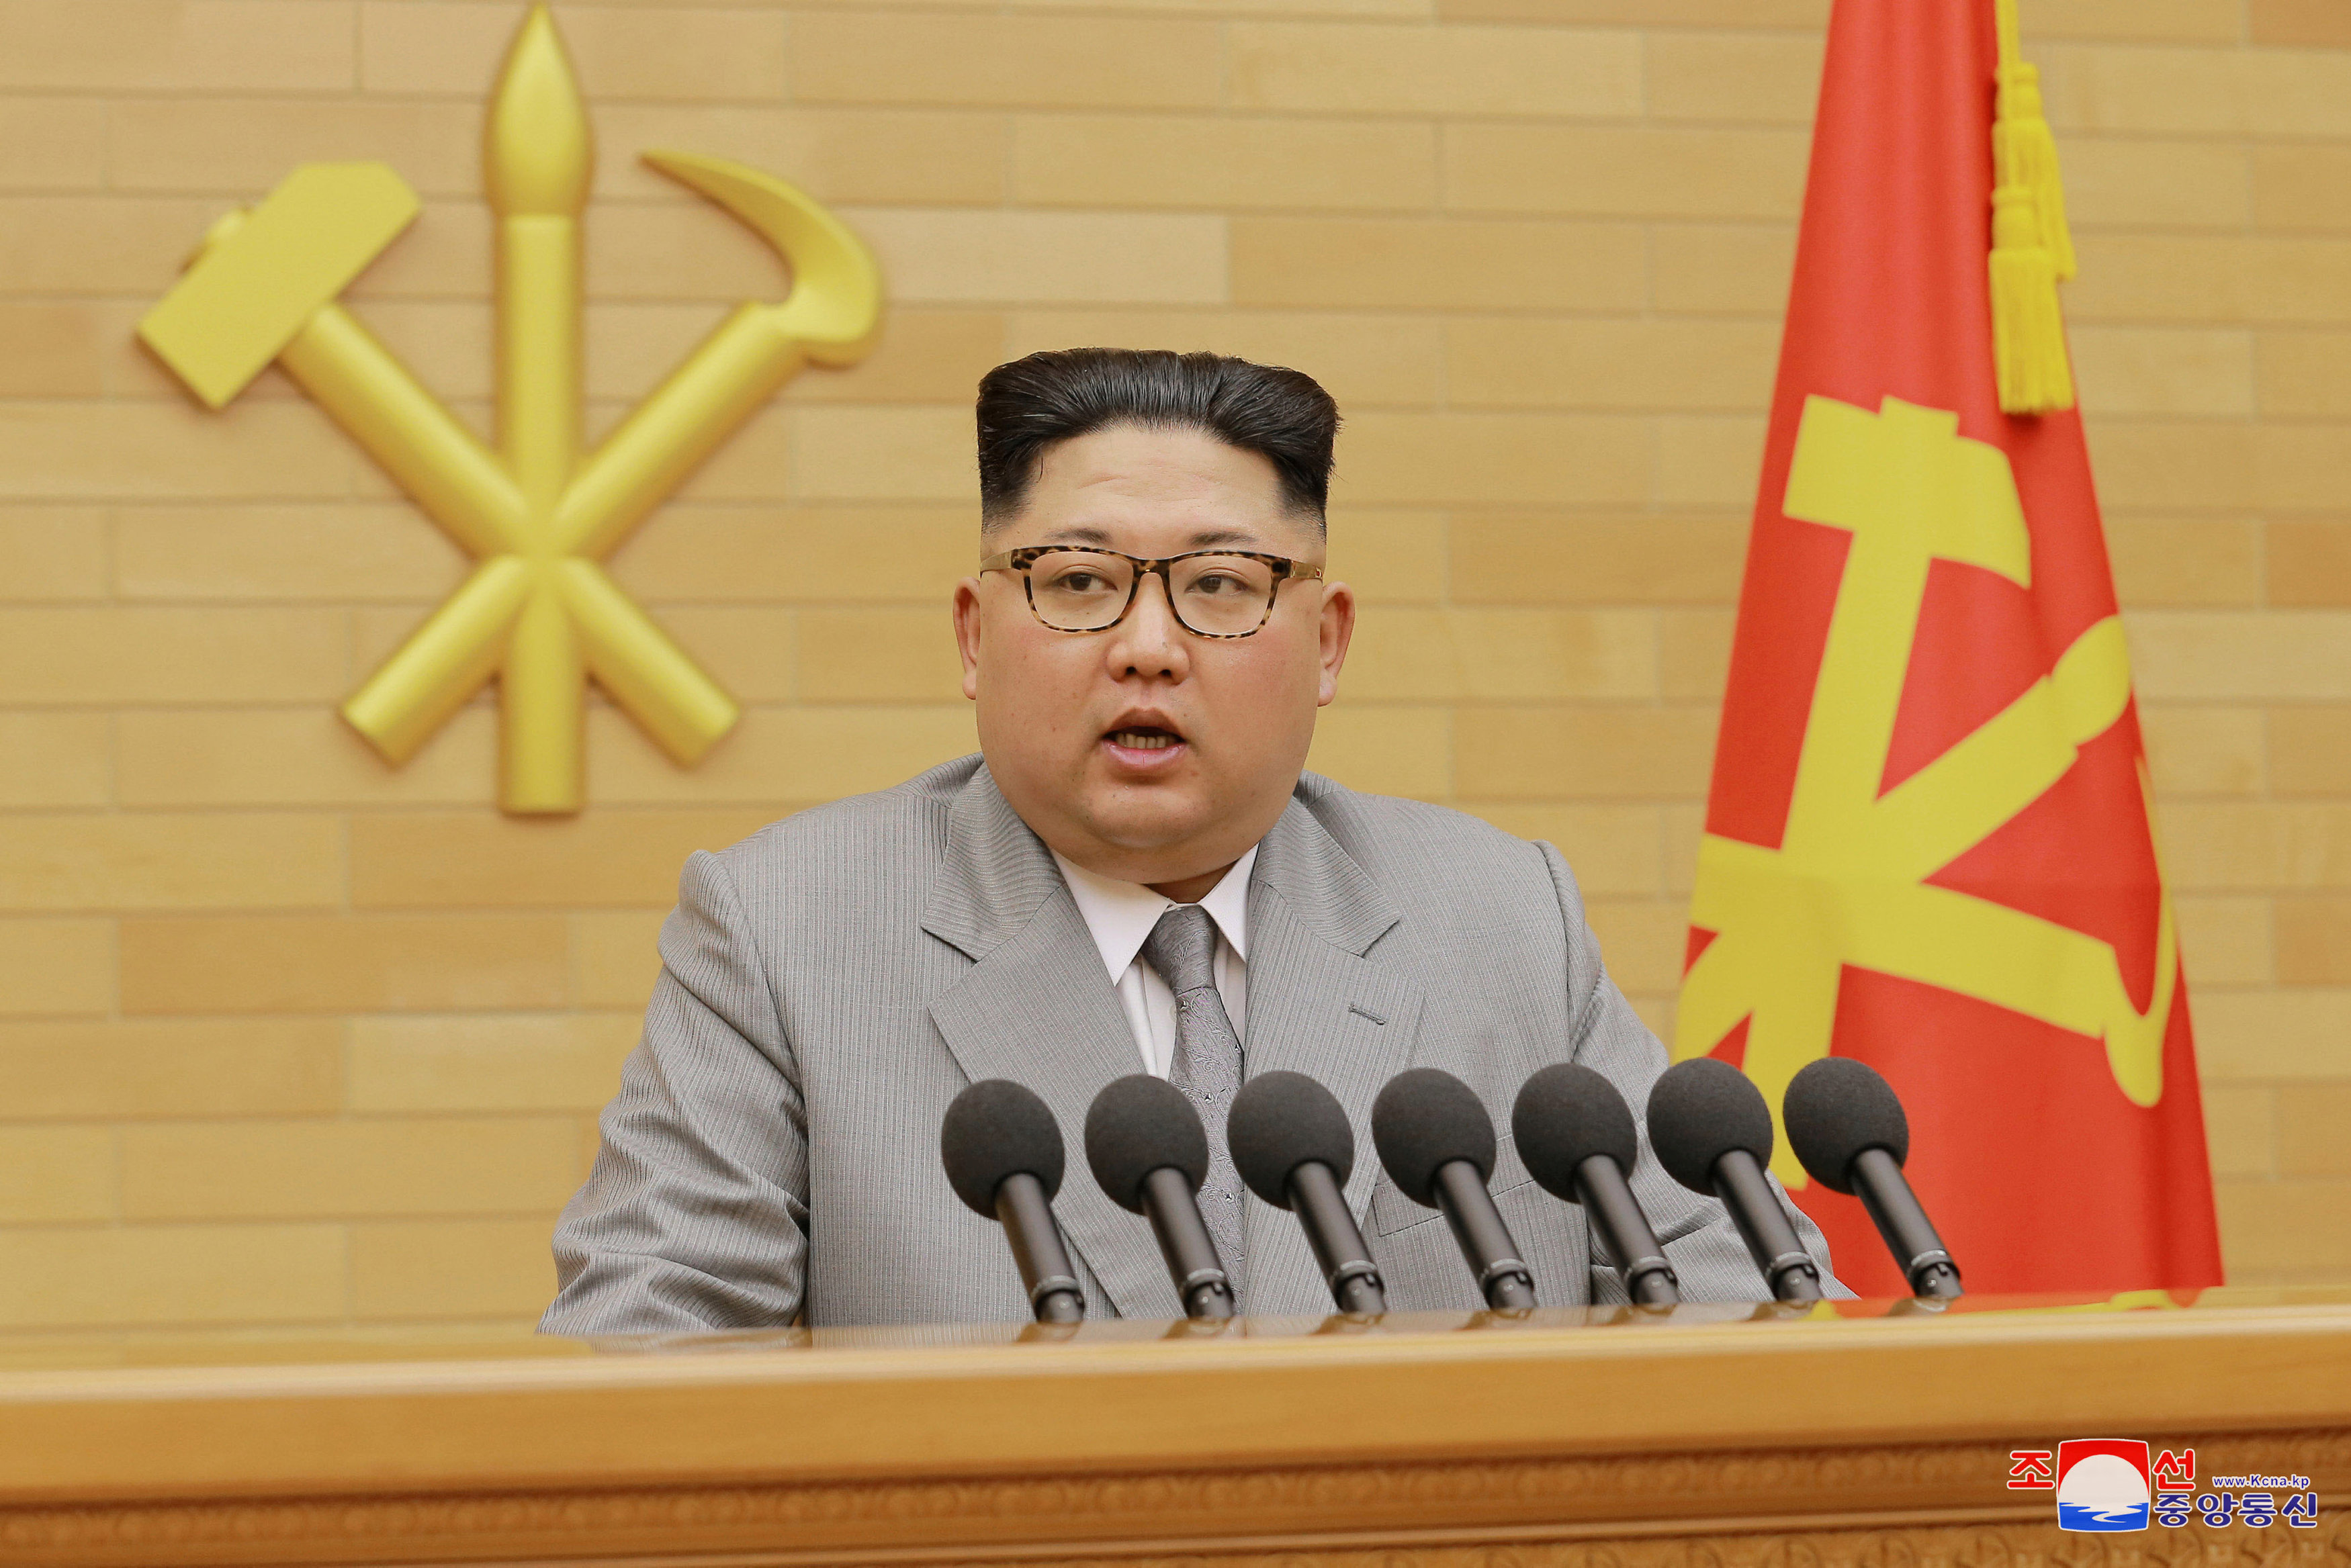 Kim goes for softer image in New Year address